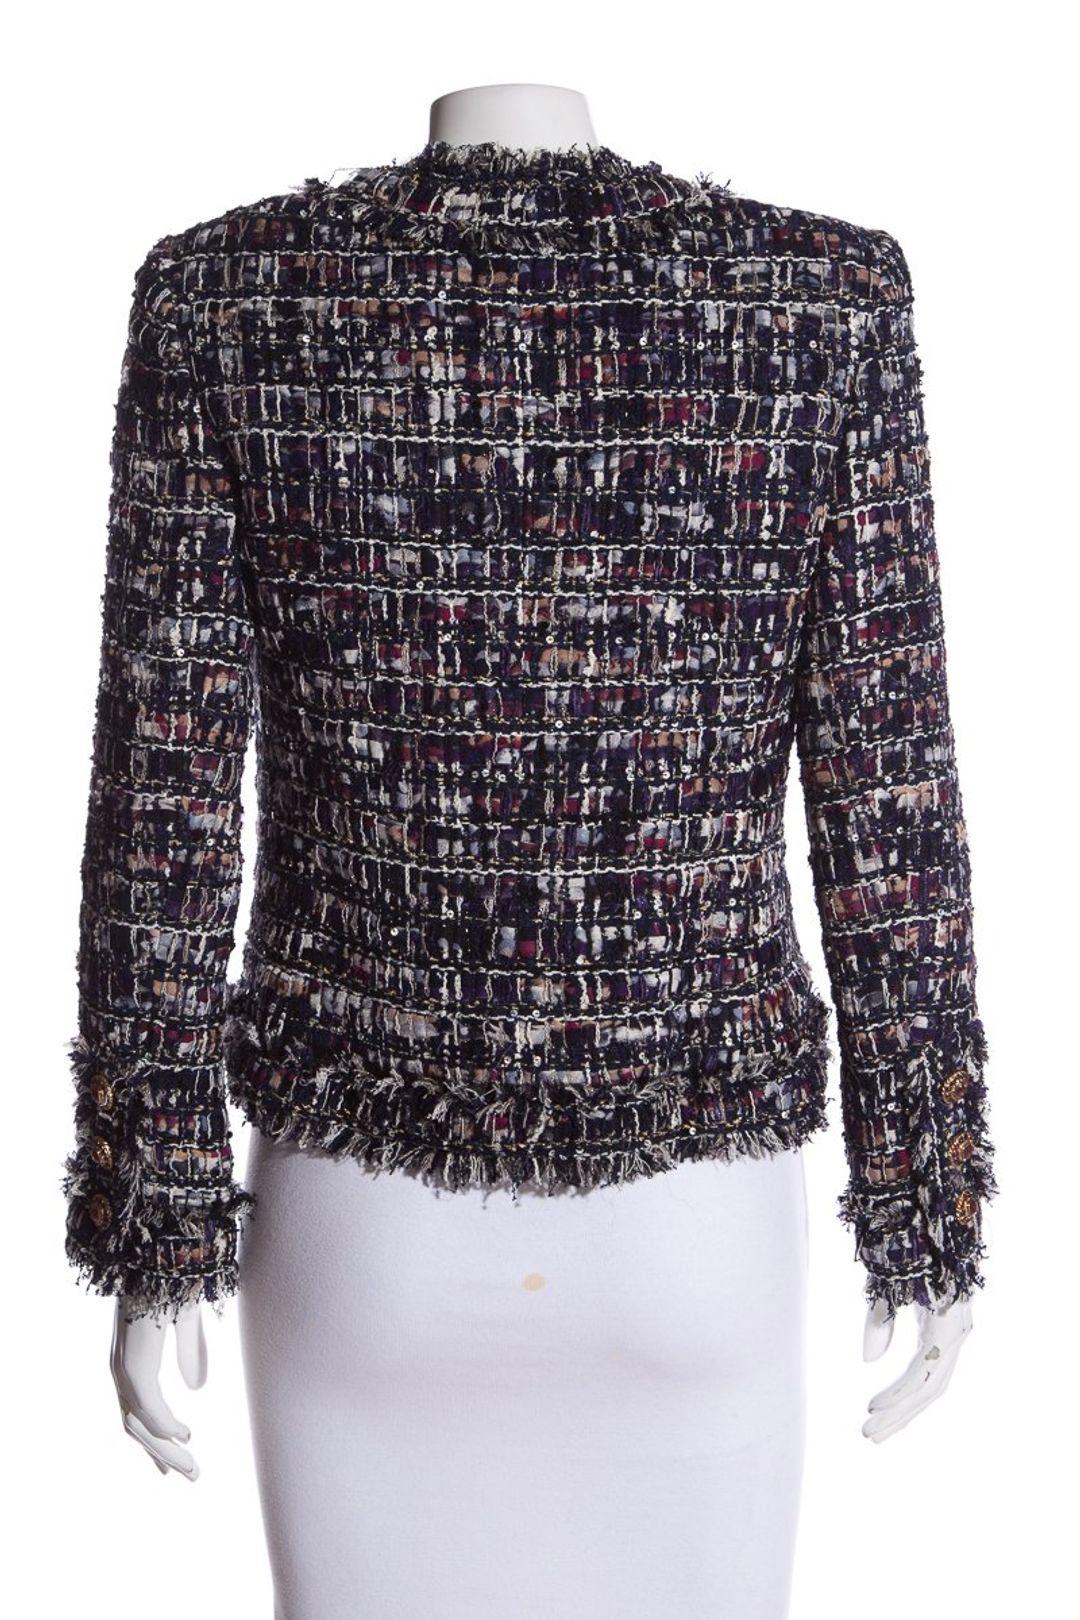 Chanel 16K$ Ribbon Tweed Jacket with CC Jewel Buttons For Sale 2